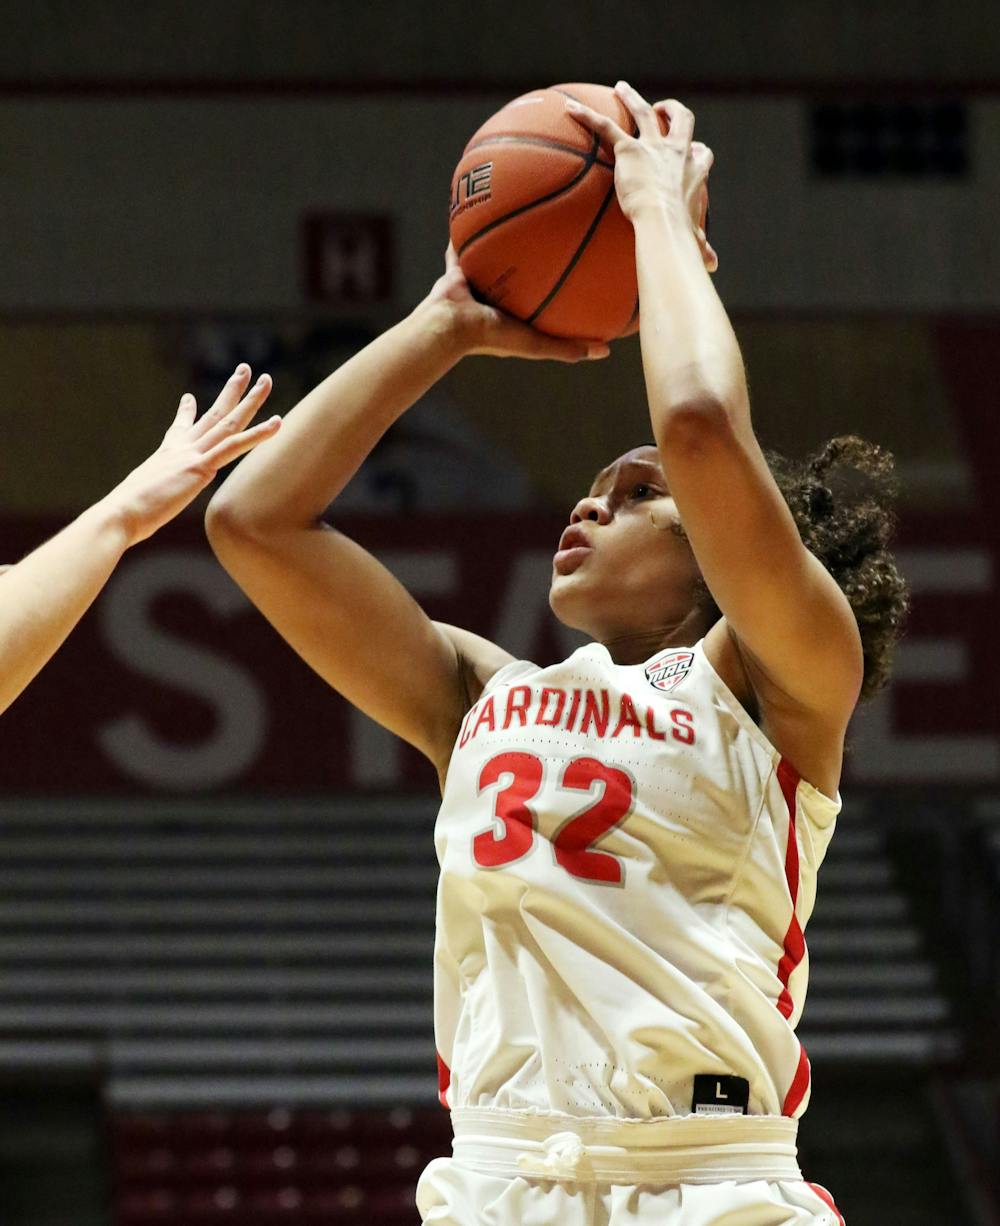 <p>Ball State junior forward Oshlynn Brown shoots during the Cardinals' game against Butler Saturday, Nov. 23, 2019, at John E. Worthen Arena. Brown scored 10 points. <strong>Paige Grider, DN</strong></p>